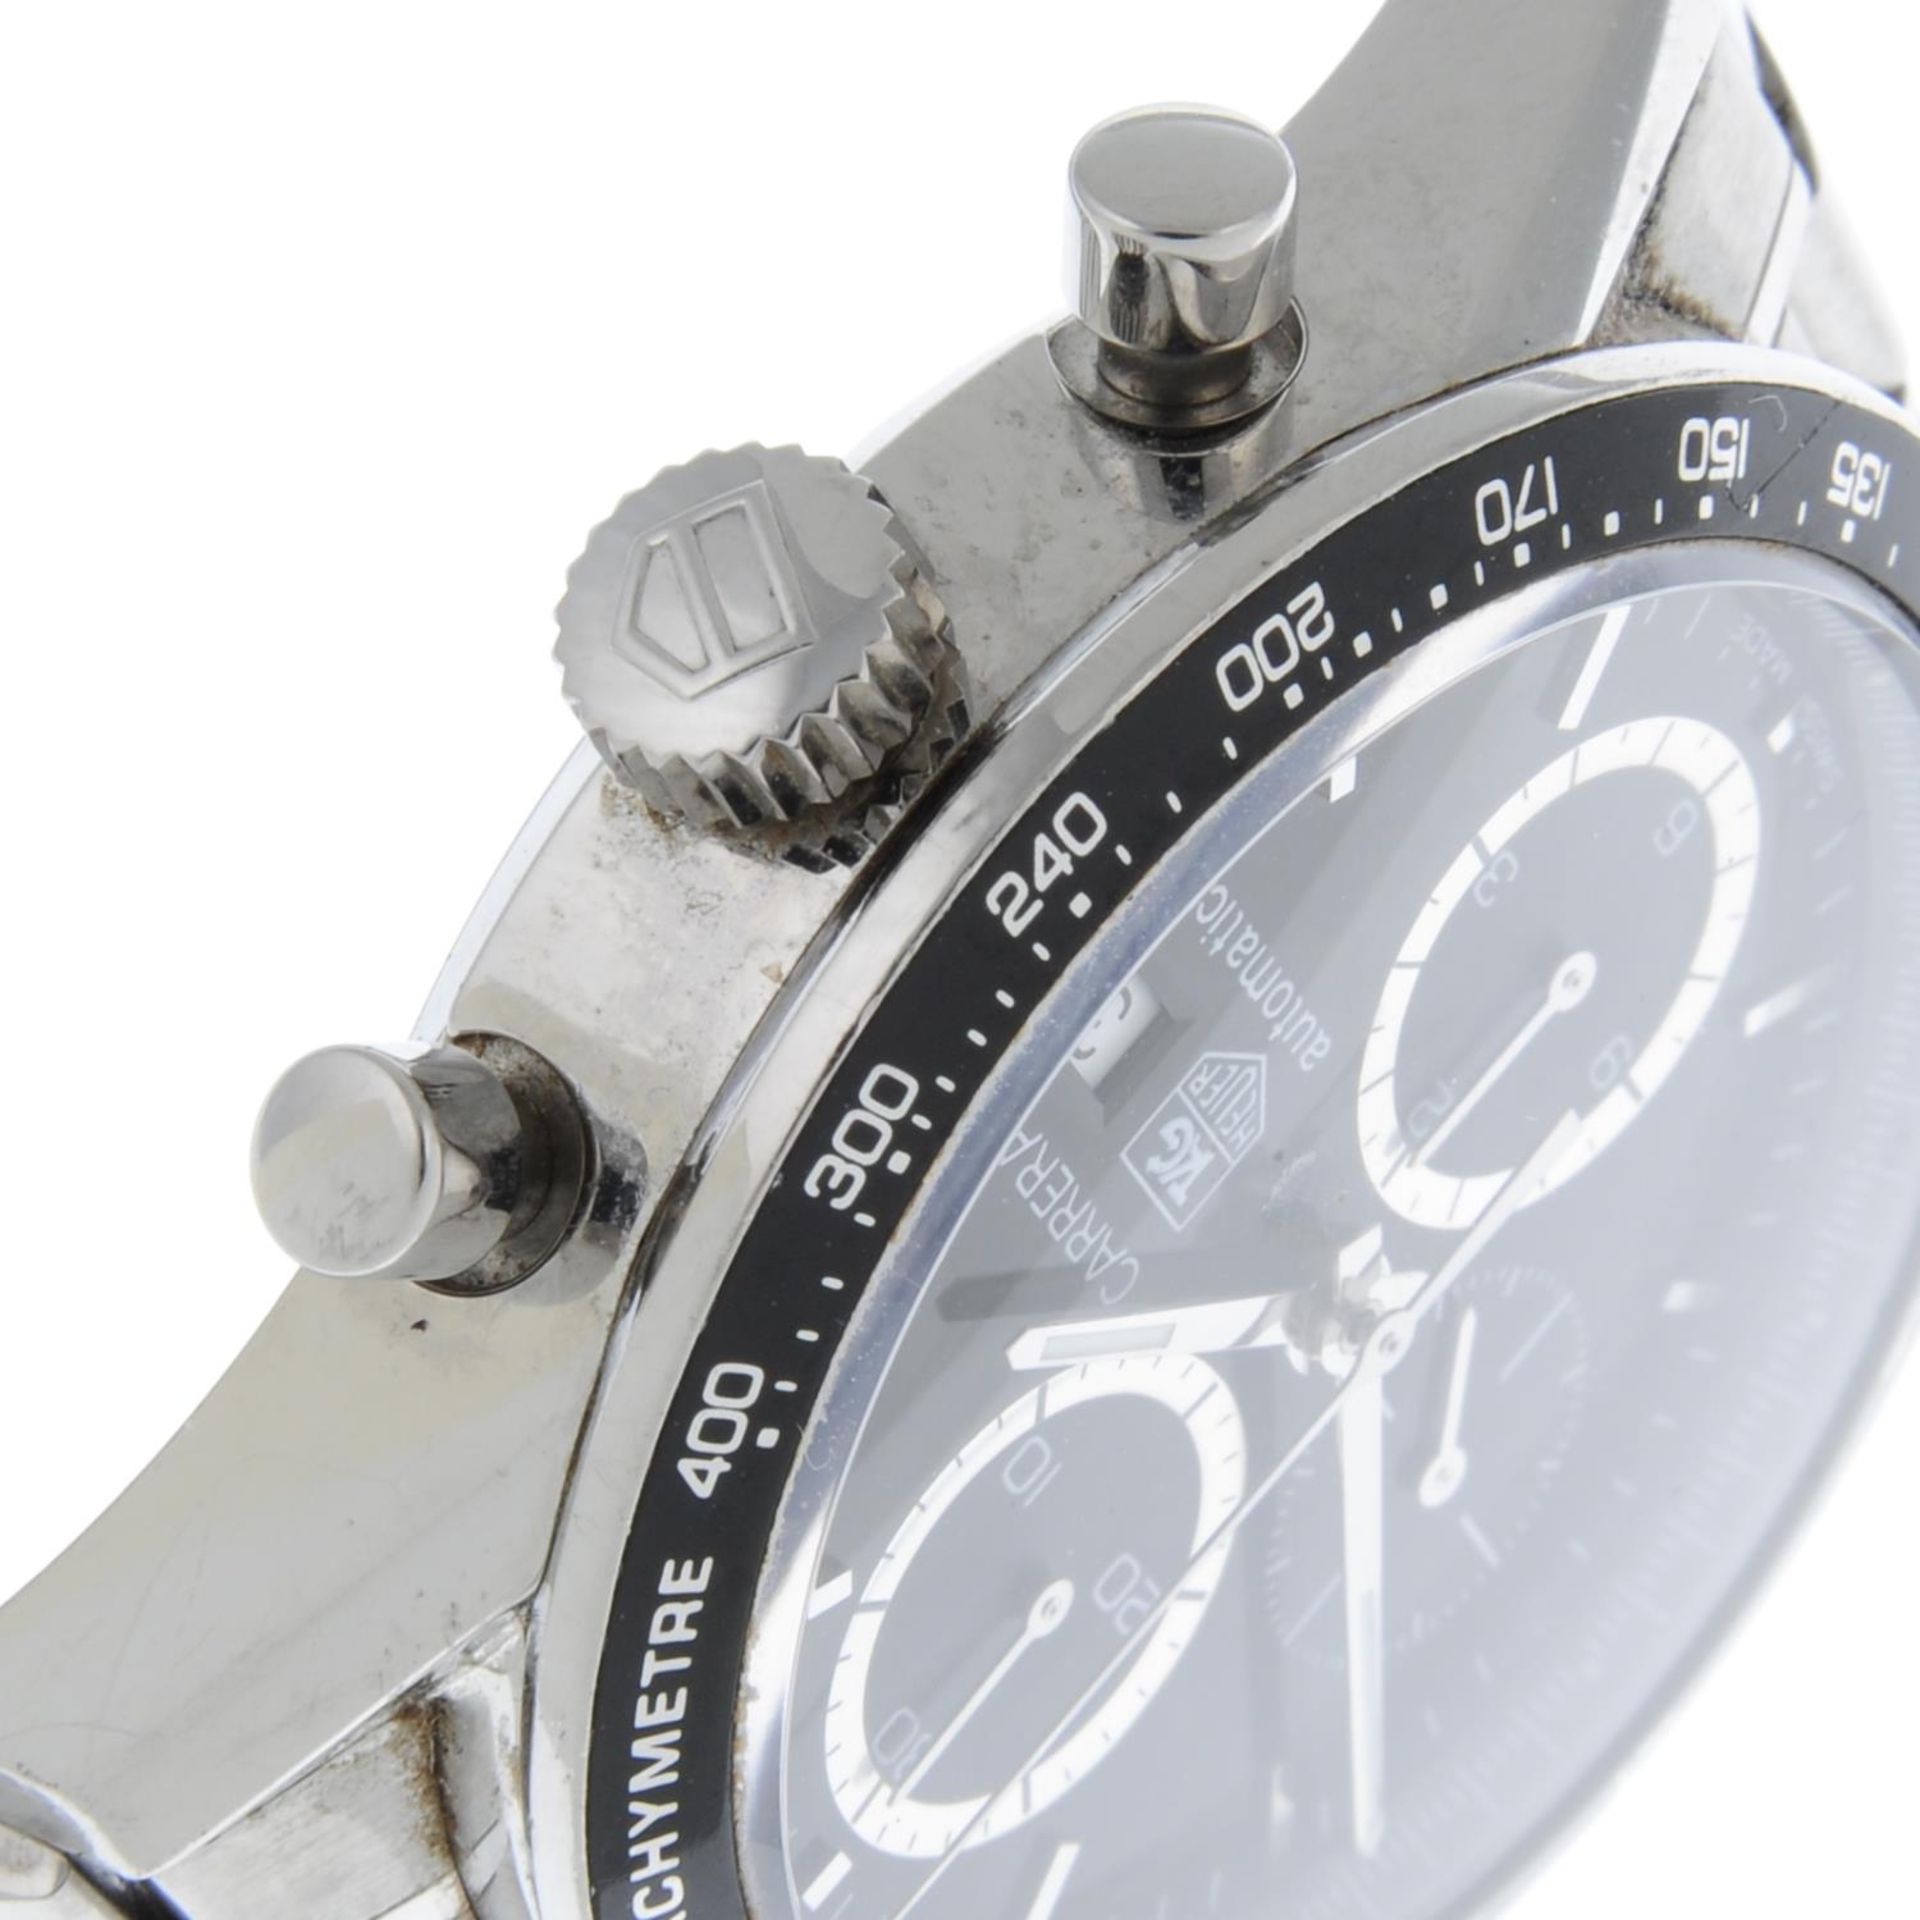 TAG HEUER - a Carrera chronograph bracelet watch. - Image 5 of 6